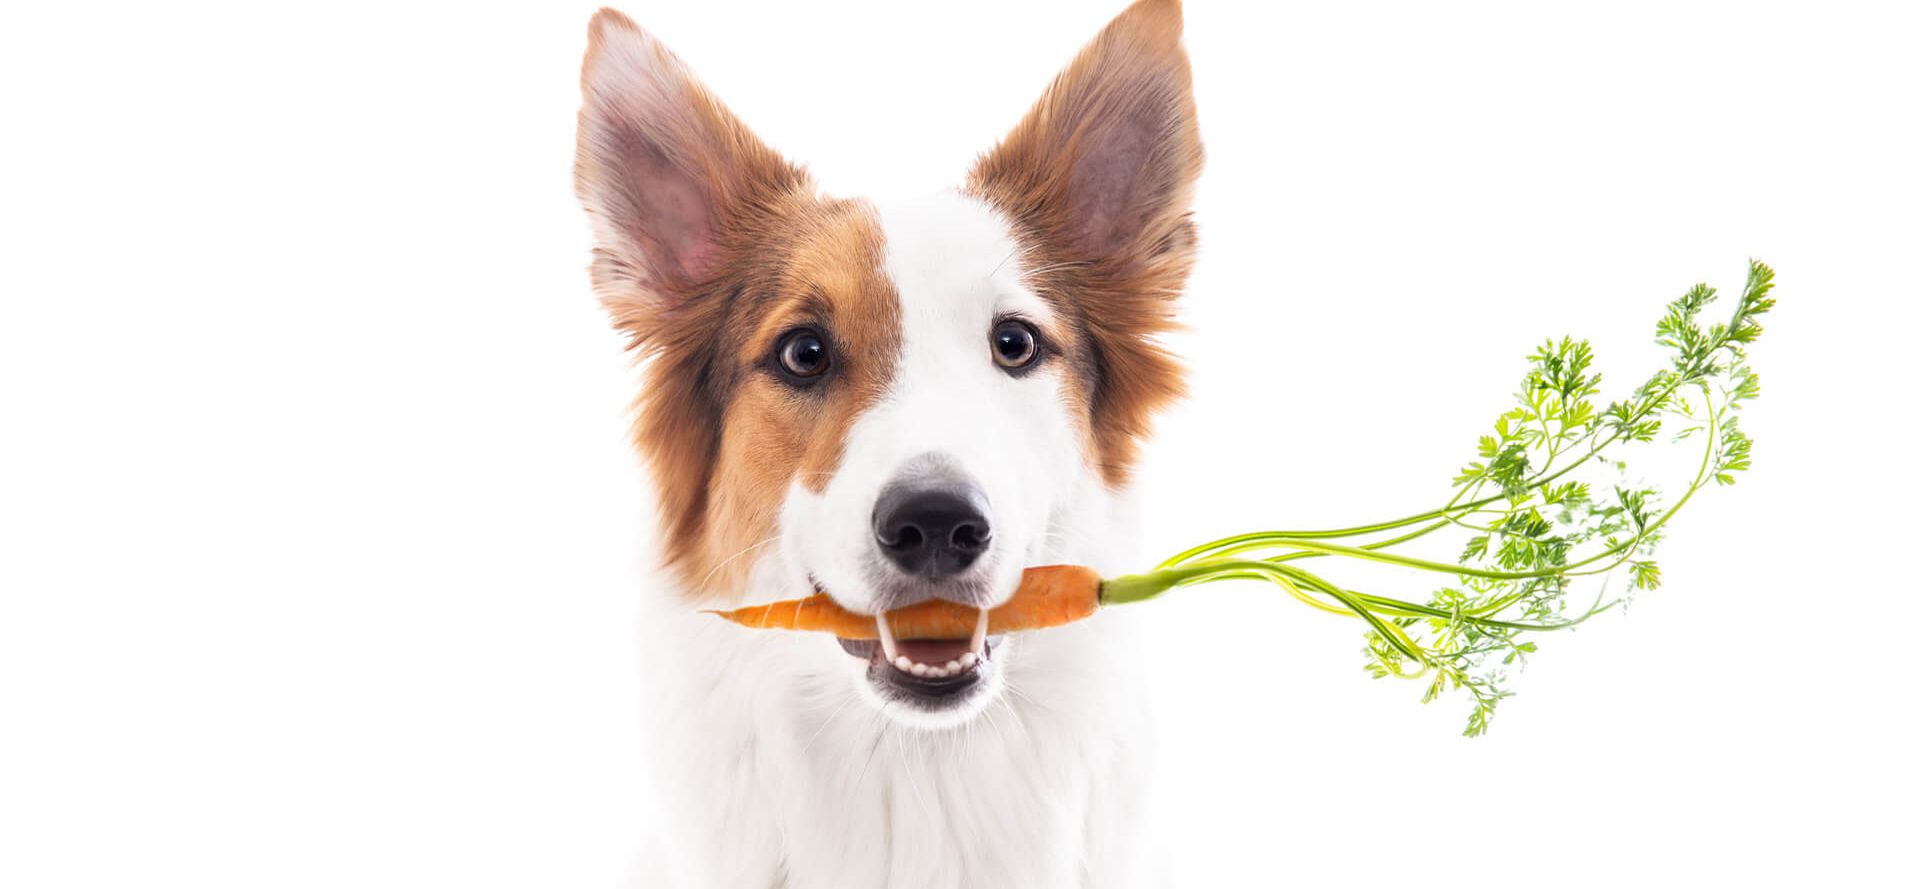 Dog Holding Carrot In Teeth.